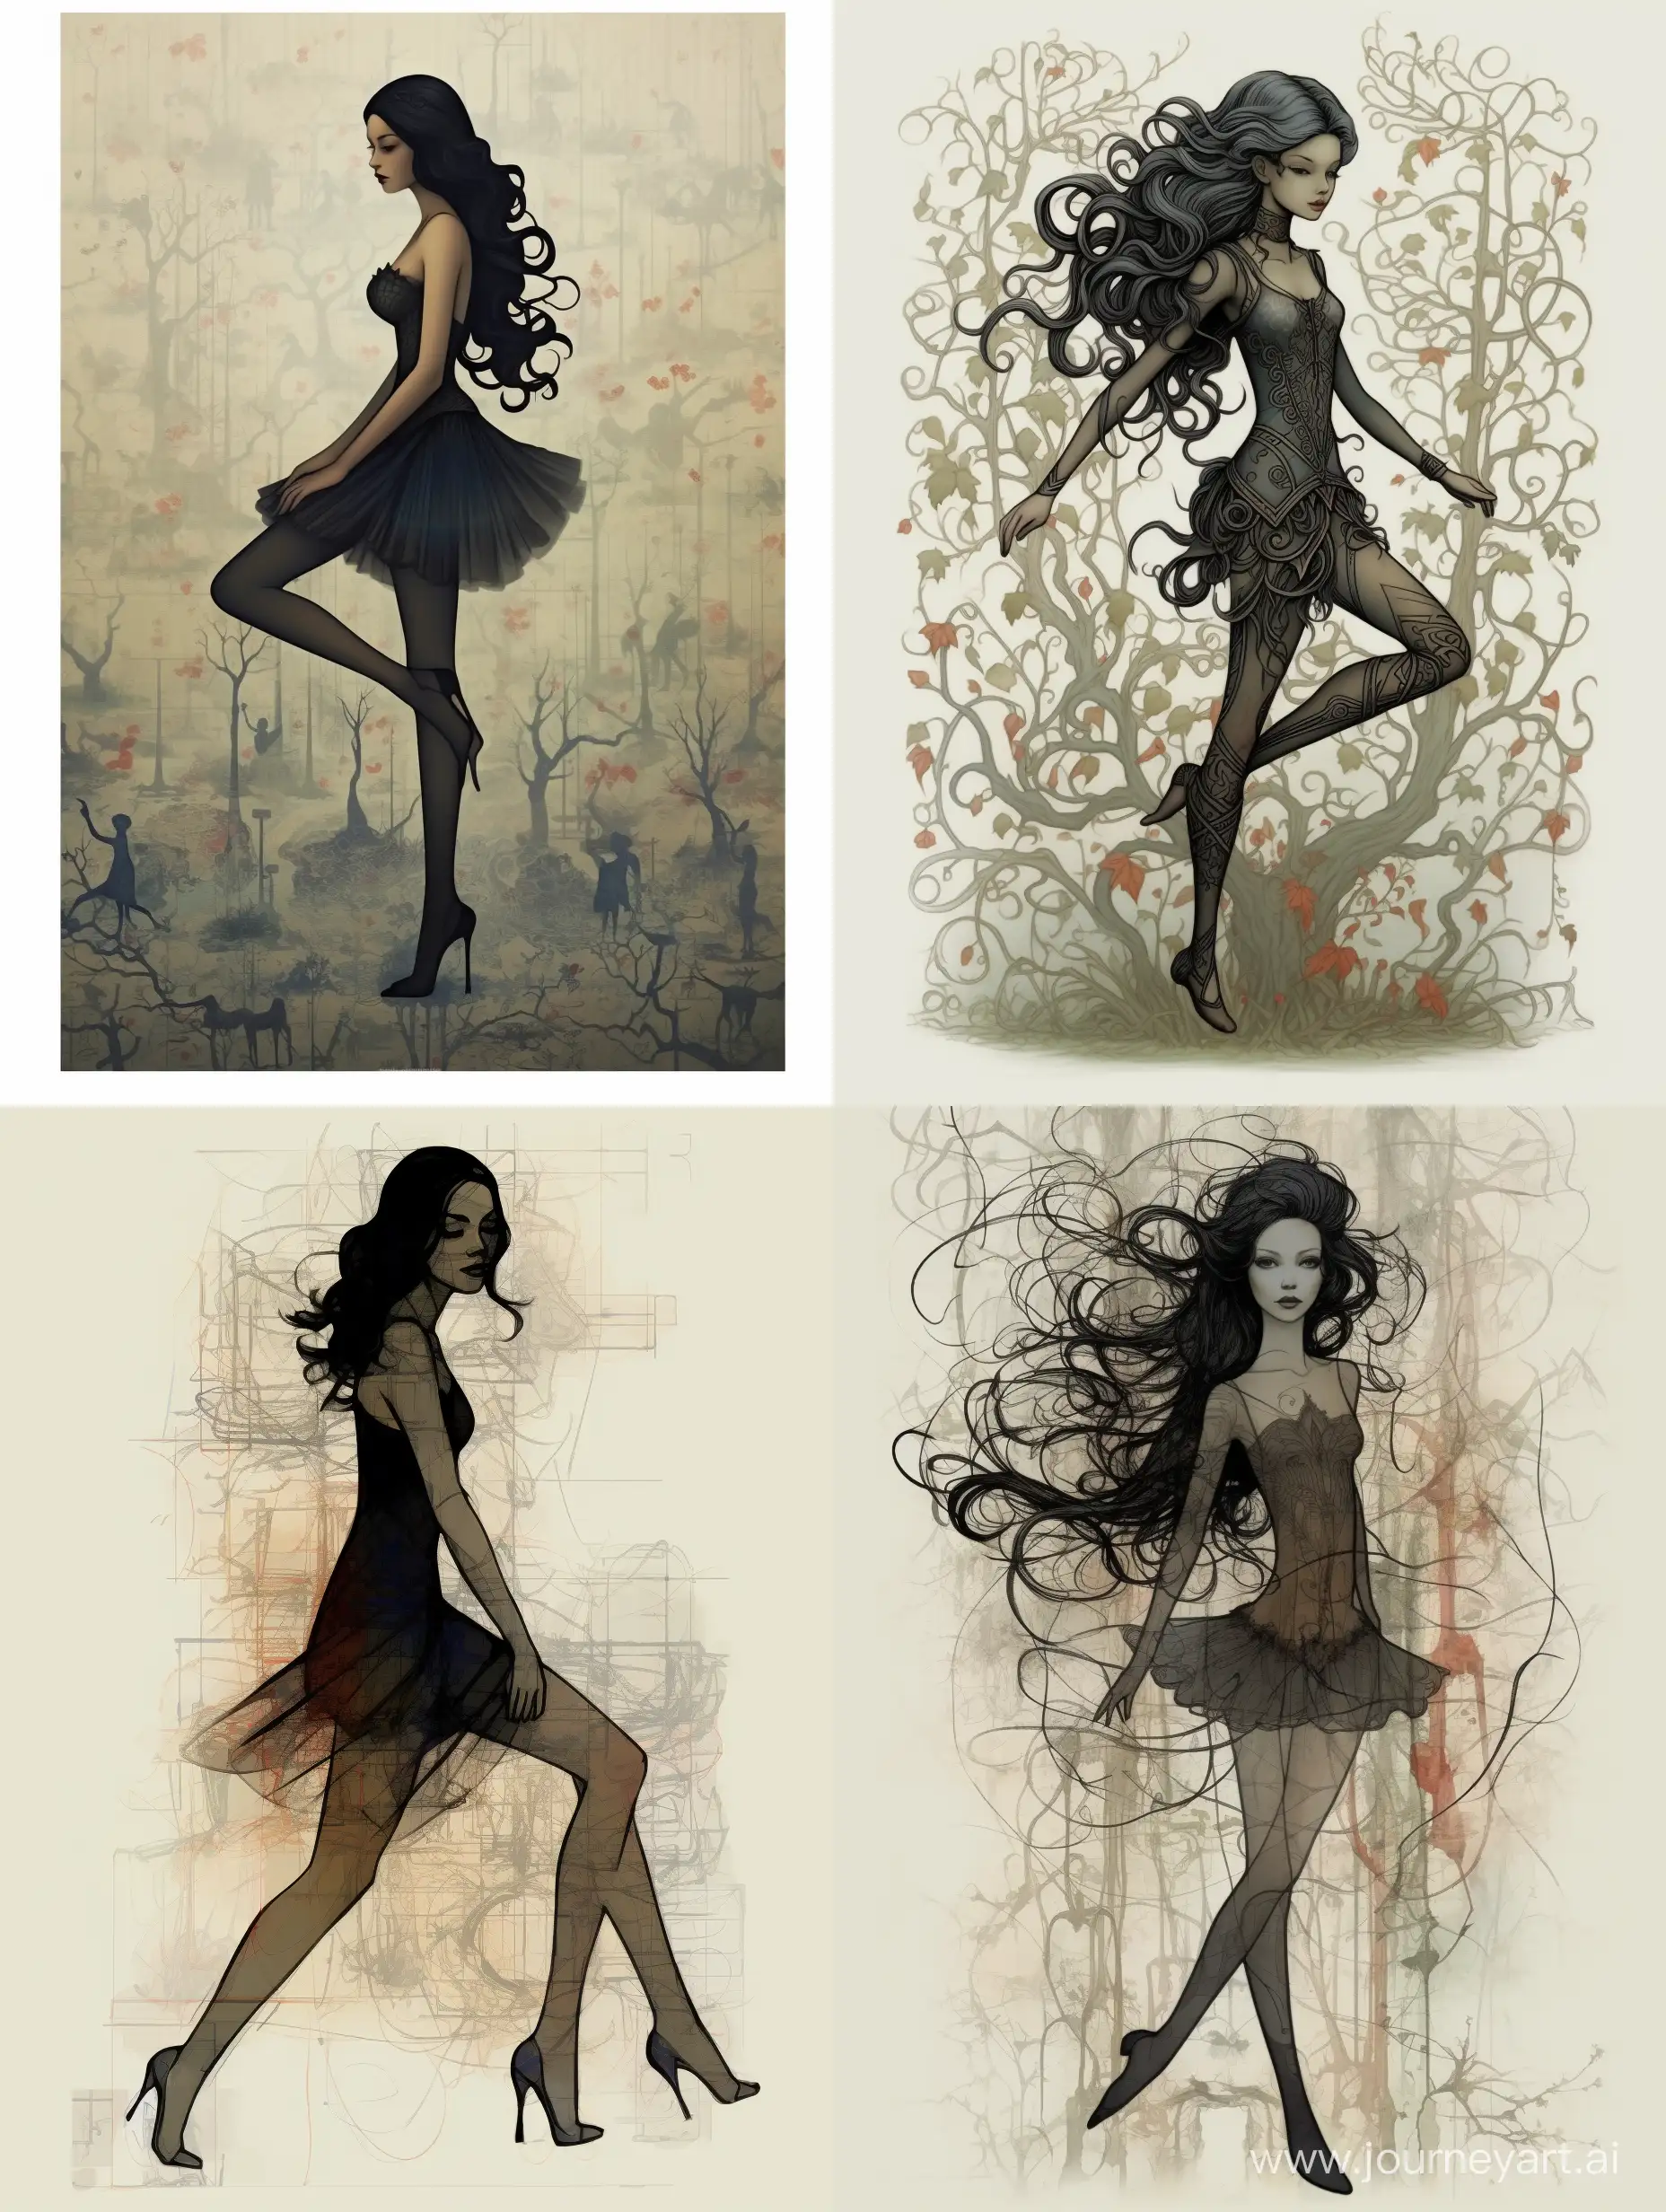 Can you reproduce the bottom right generated image, but making it an even simpler drawing and including the rest of her body (legs and feet)?